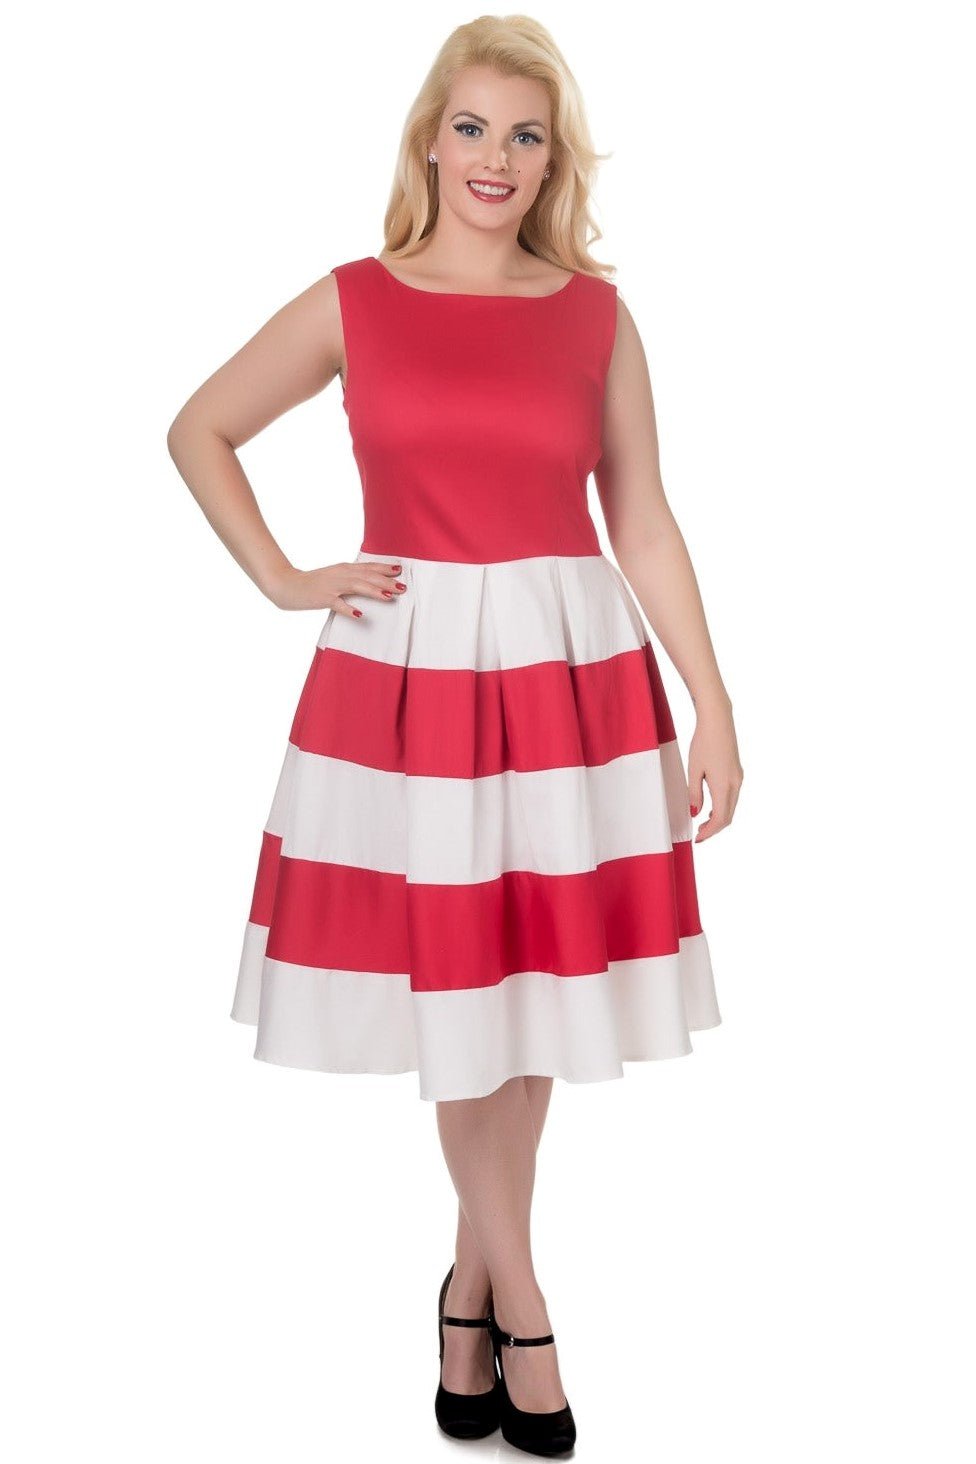 front view of model wearing our red and white striped Anna dress